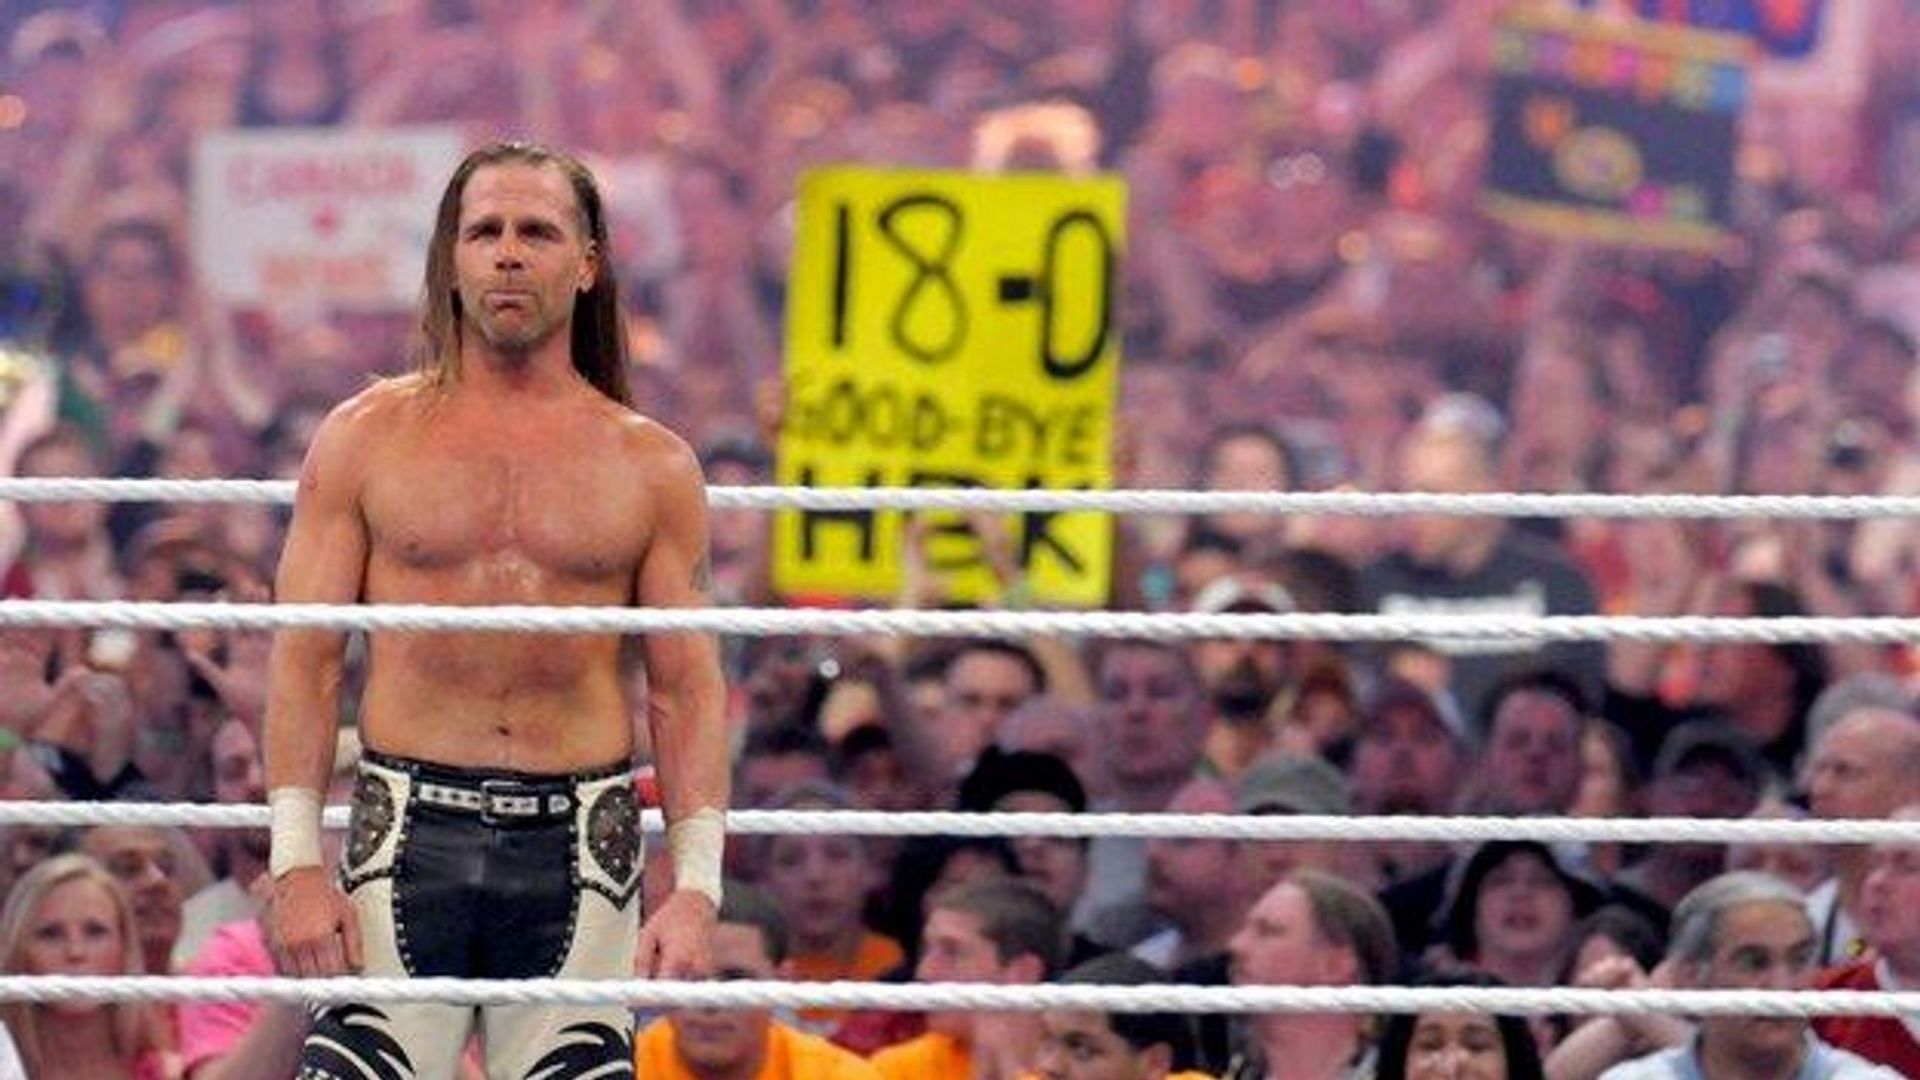 Shawn Michaels has inspired a lot of stars in the wrestling industry